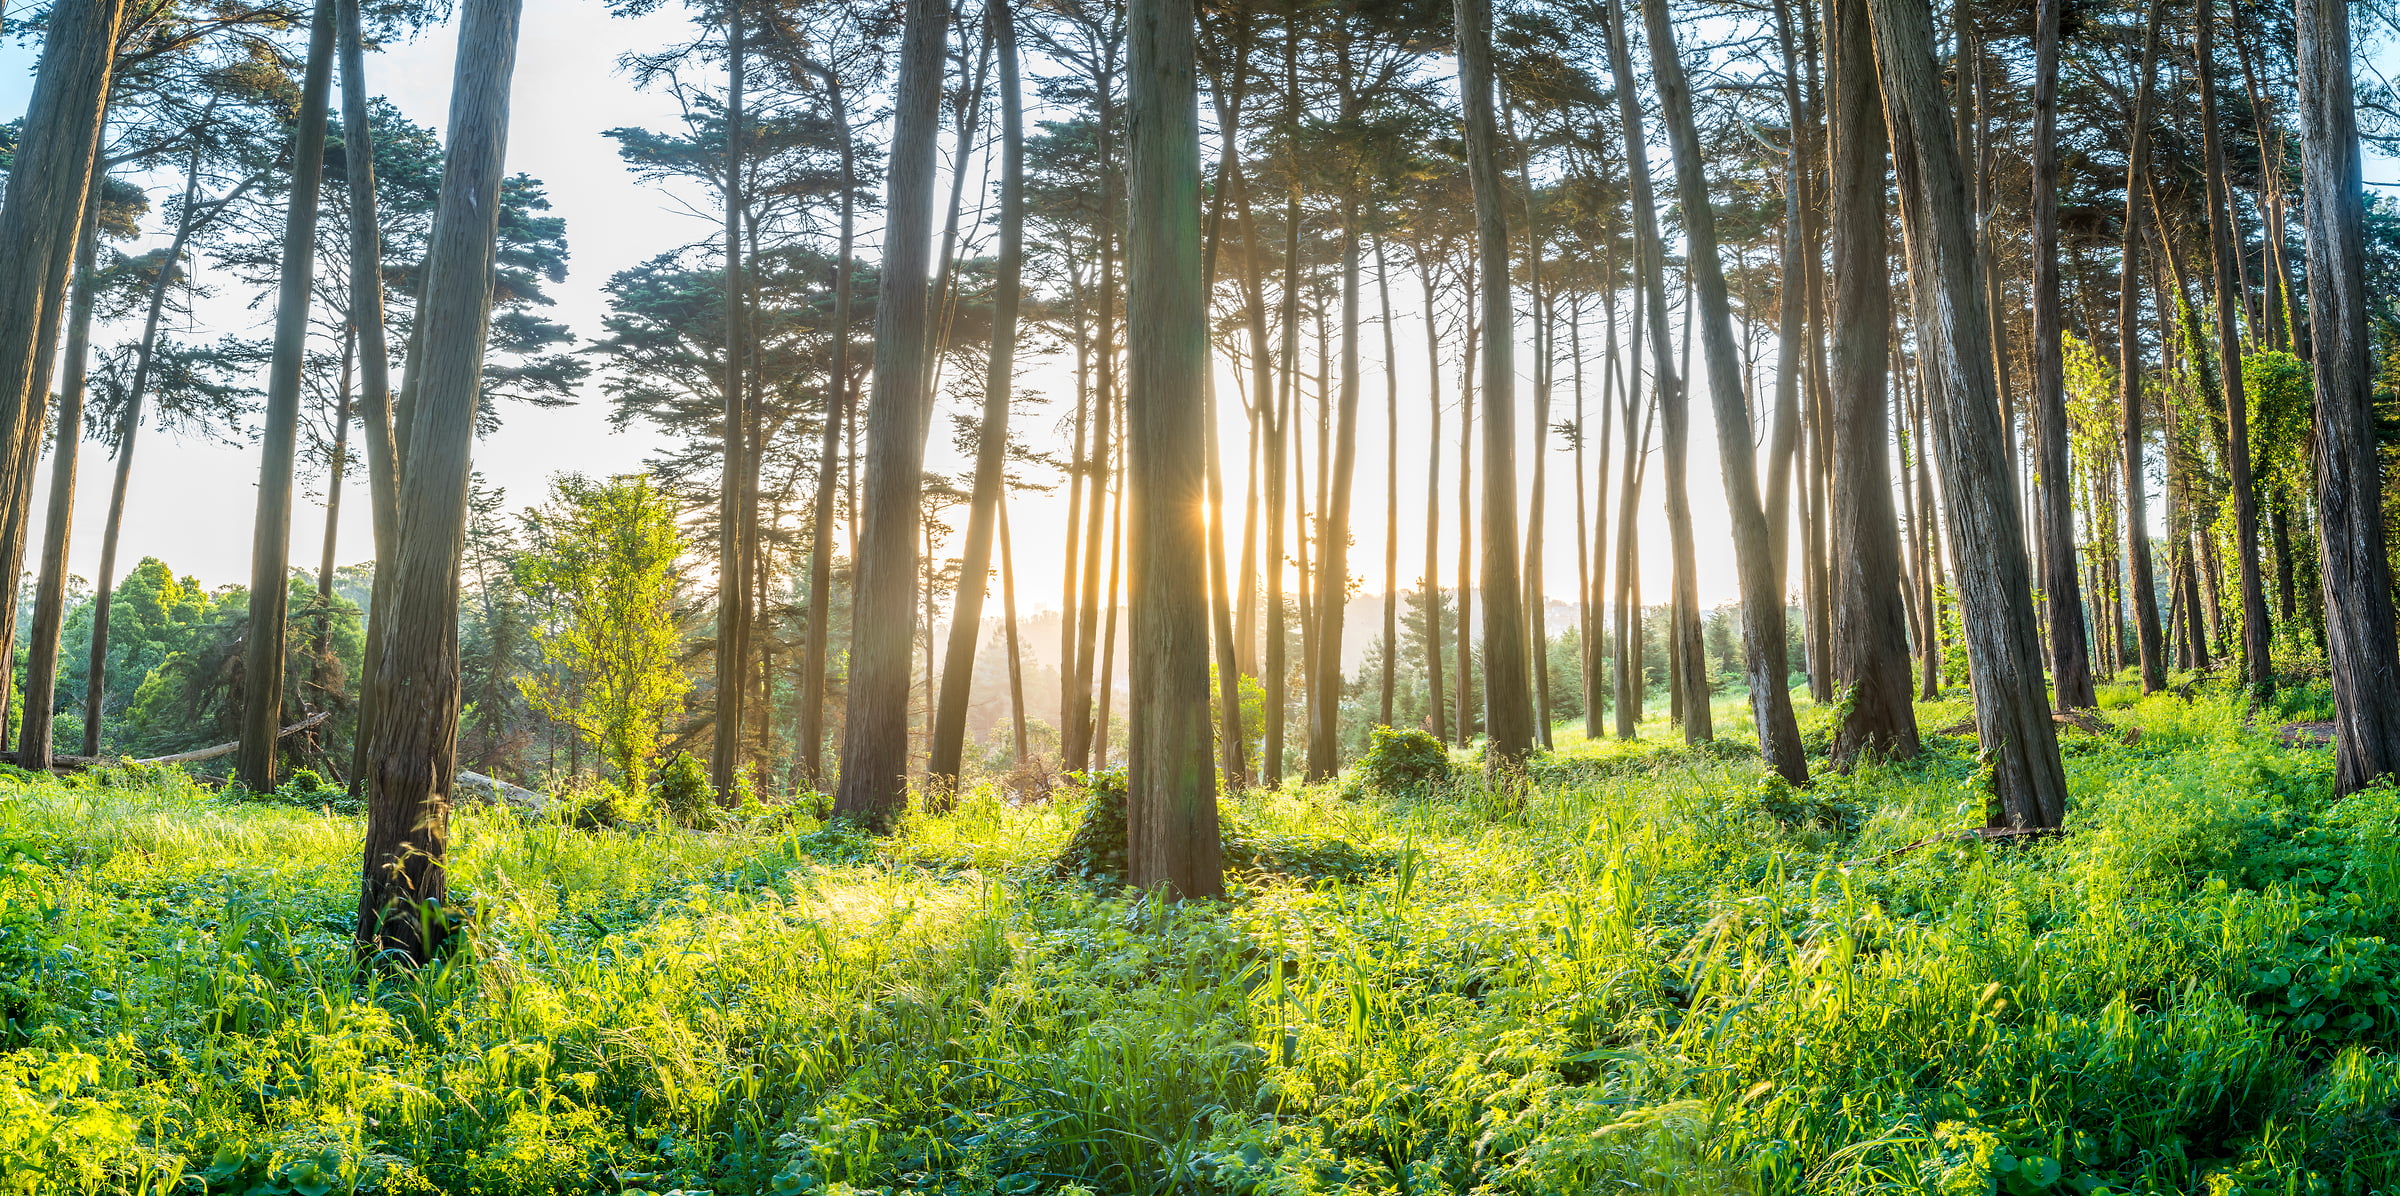 285 megapixels! A very high resolution, large-format VAST photo print of trees in the Presidio of San Francisco at sunrise; fine art nature photo created by Justin Katz in California.